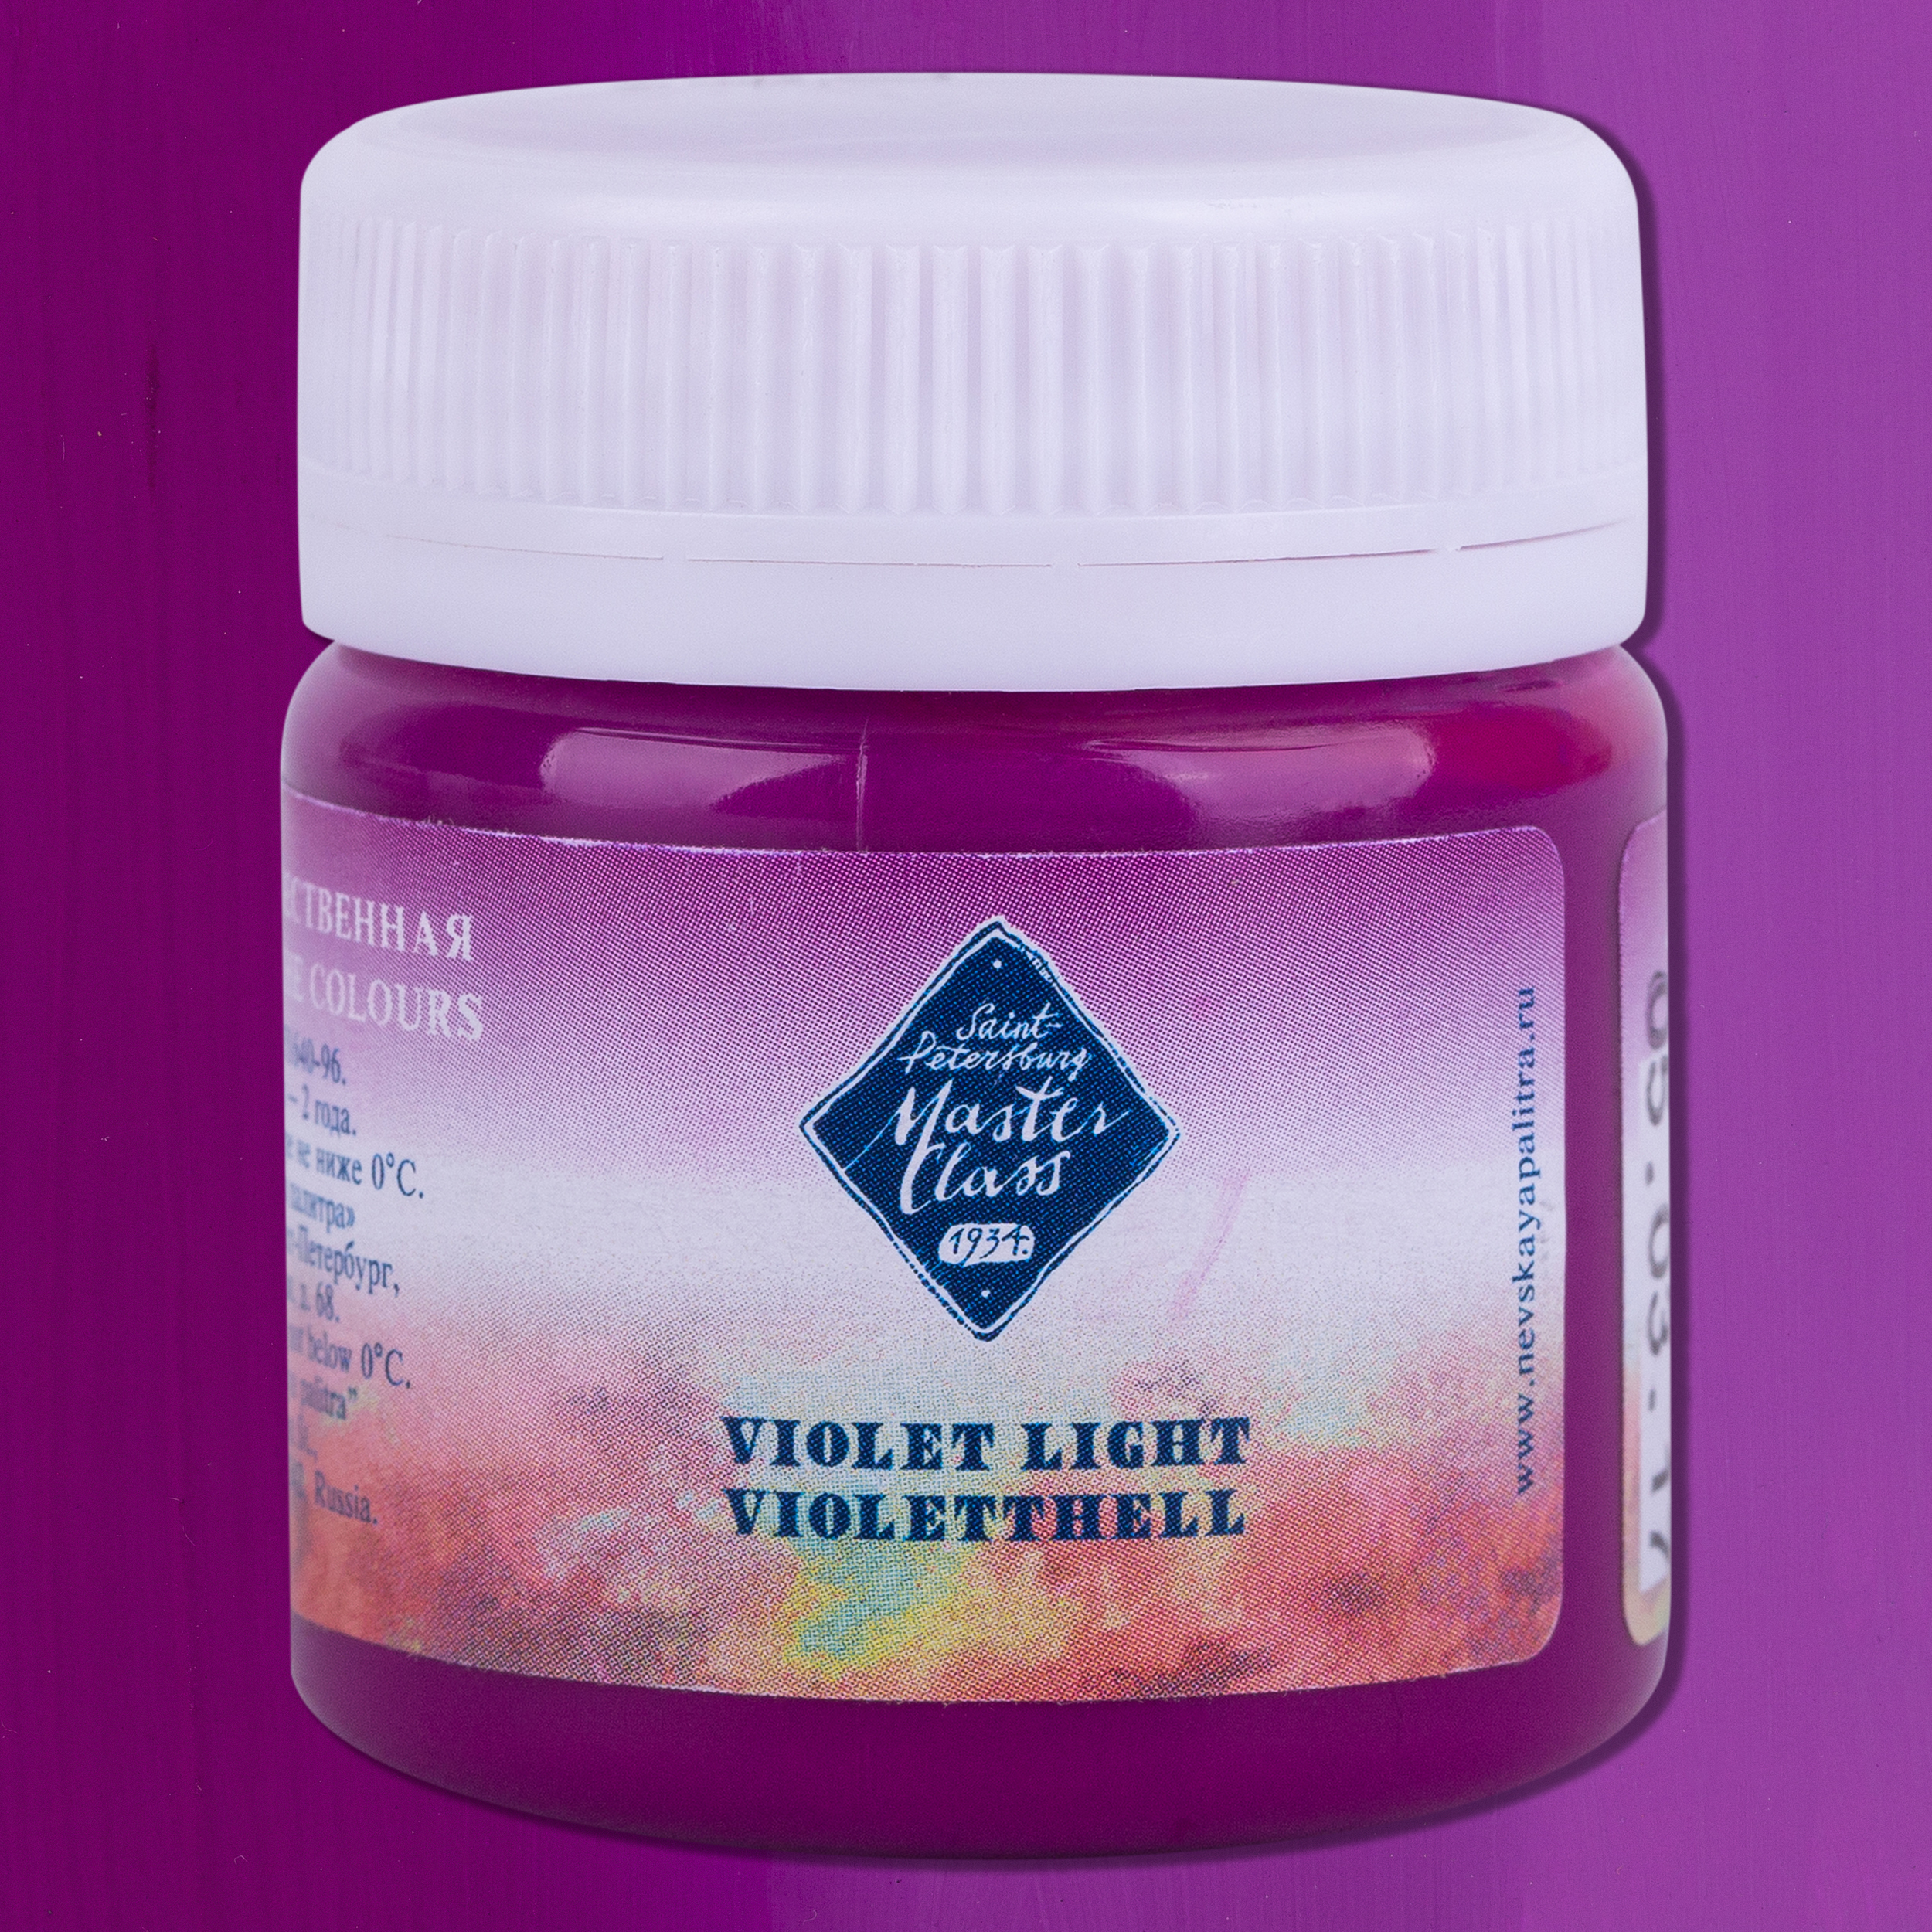 Violet Light "Master Class" in the jar. № 605